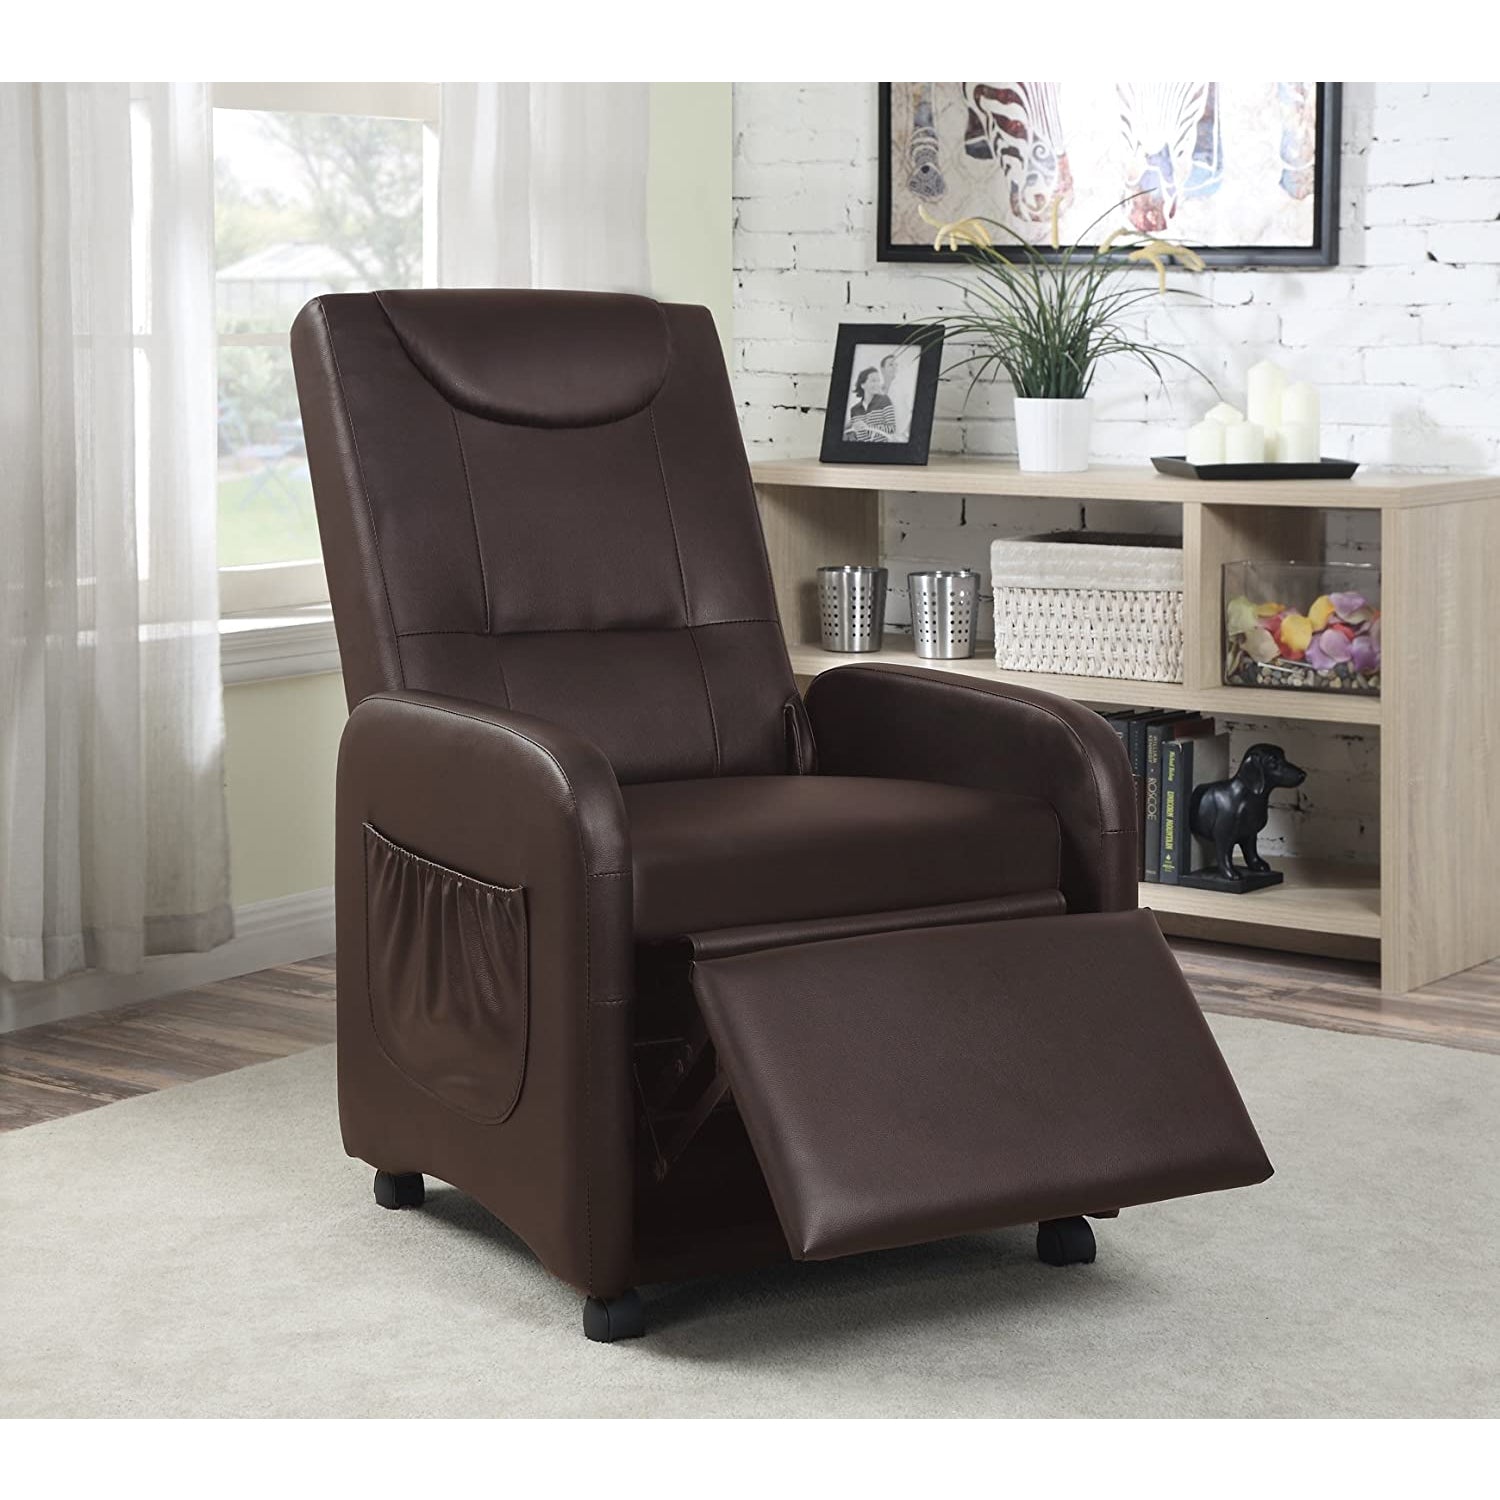 ViscoLogic Folding Gaming Faux Leather Manual Reclining Living Room Chaise Sofa Recliner Chair (Brown)…